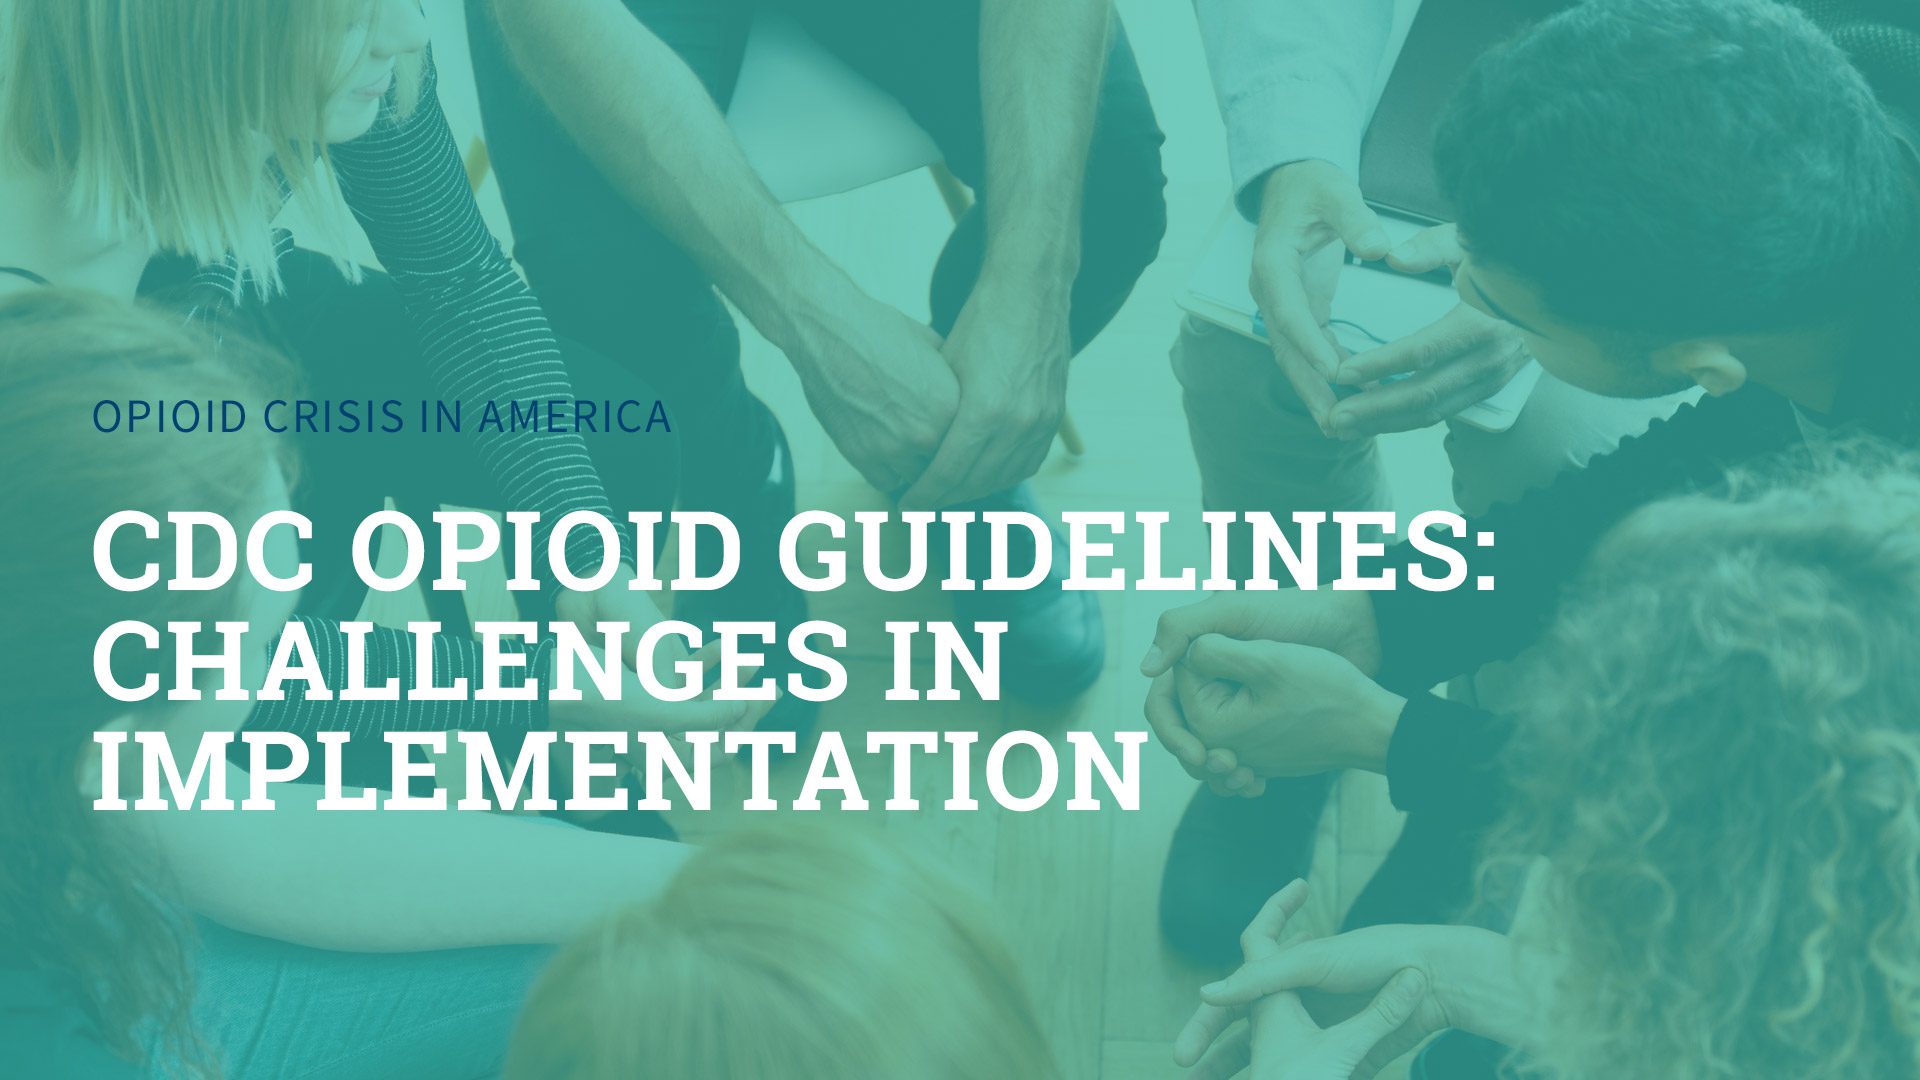 CDC Opioid Guidelines: Challenges in Implementation